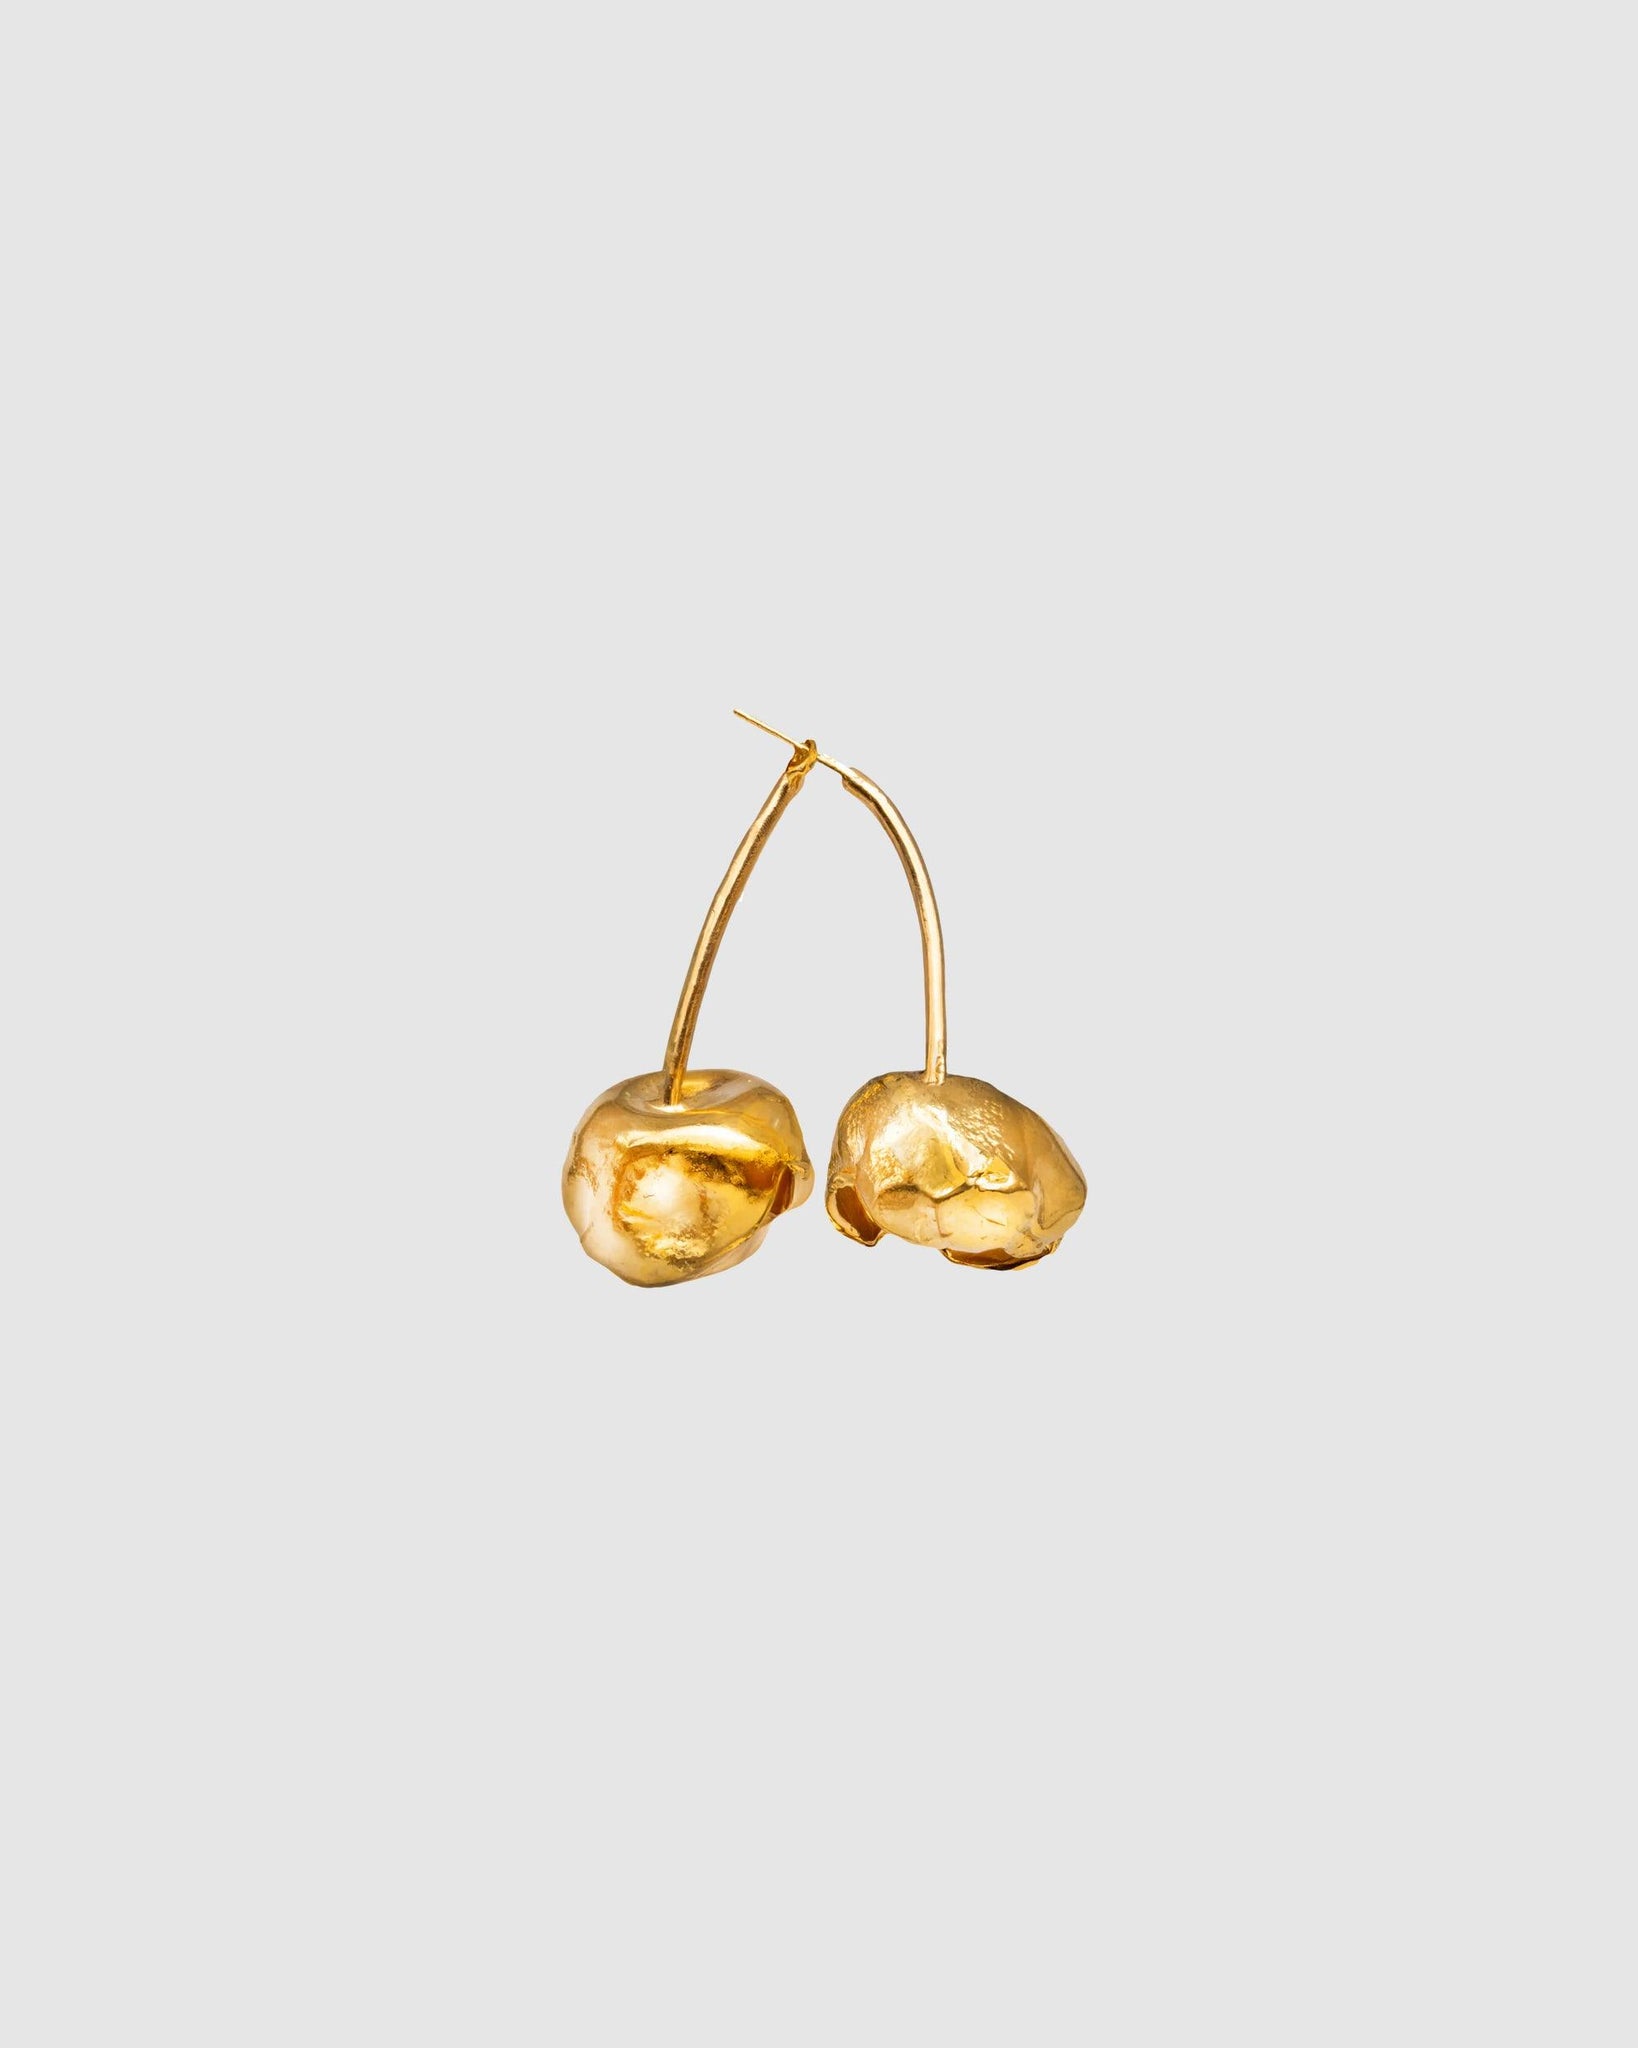 Cerezas Gold Earrings - {{ collection.title }} - Chinatown Country Club 